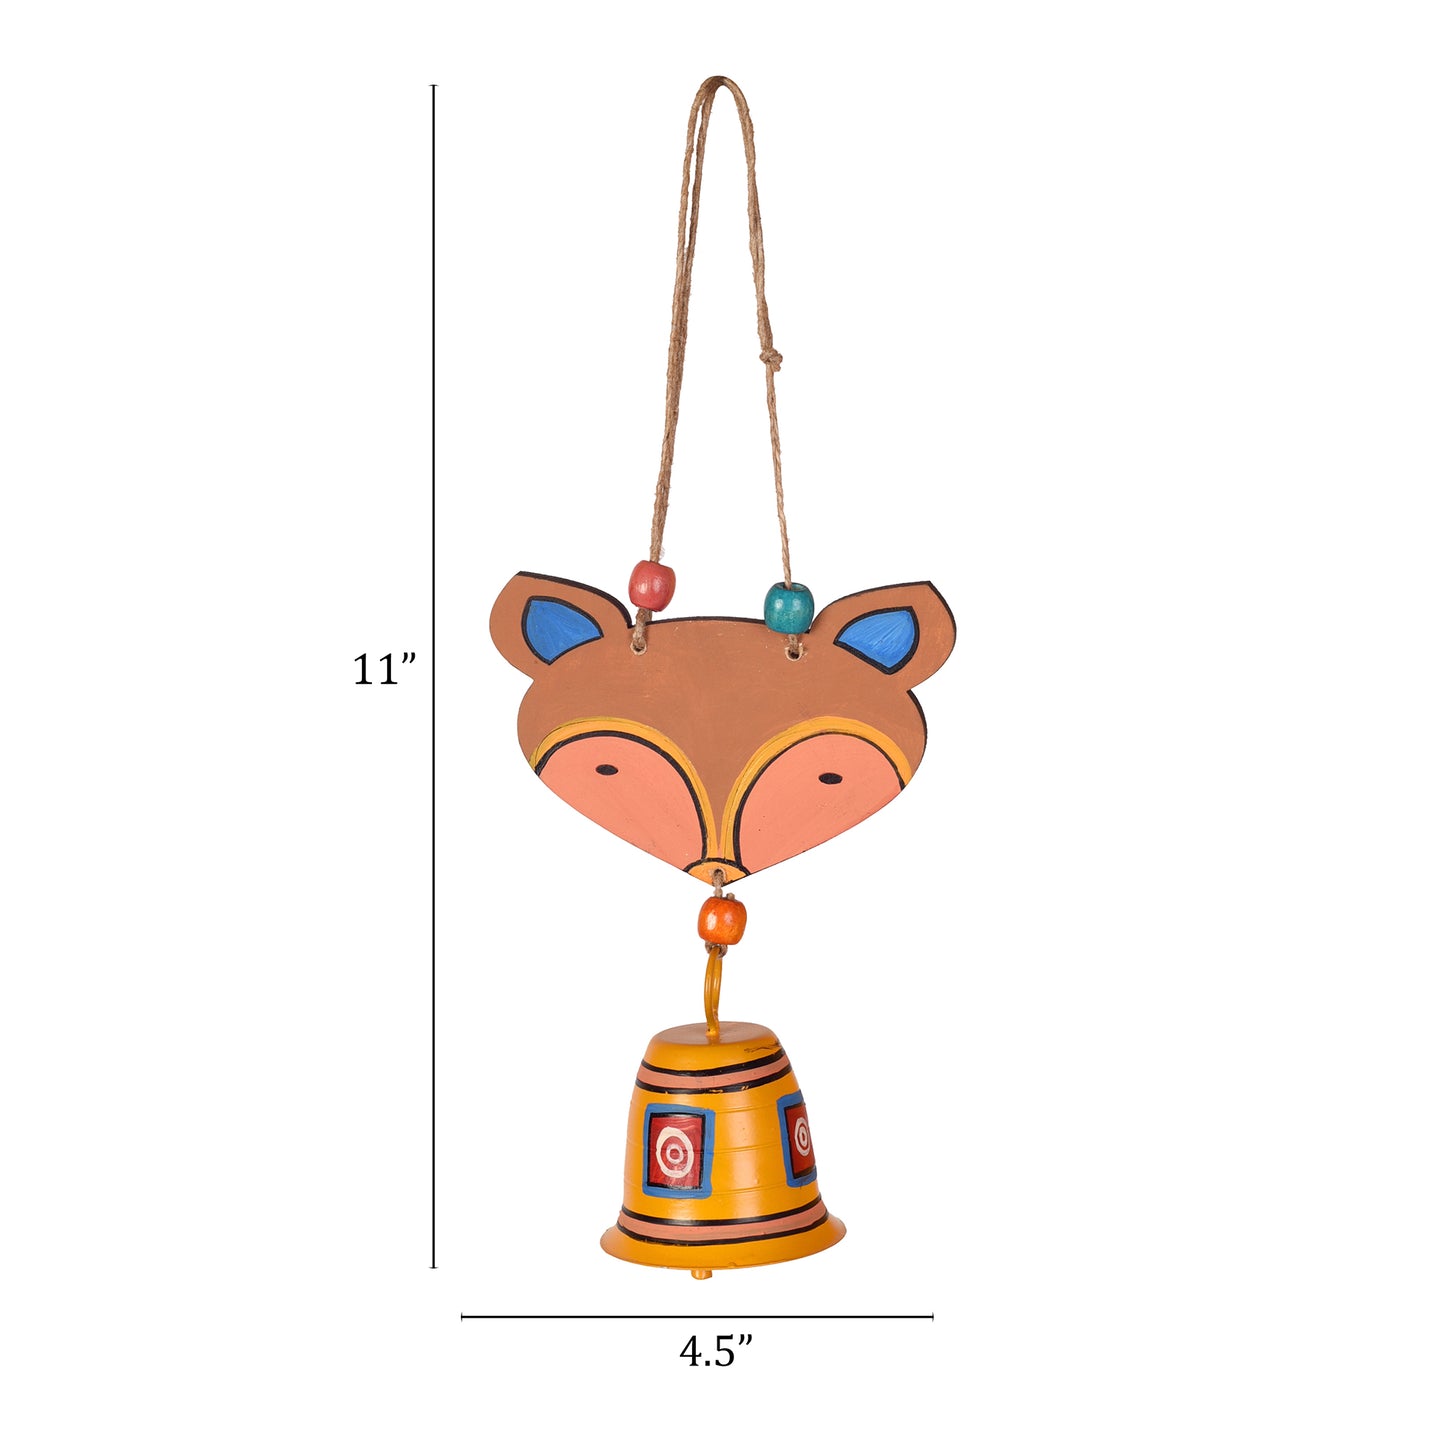 Wind Chime Bell 